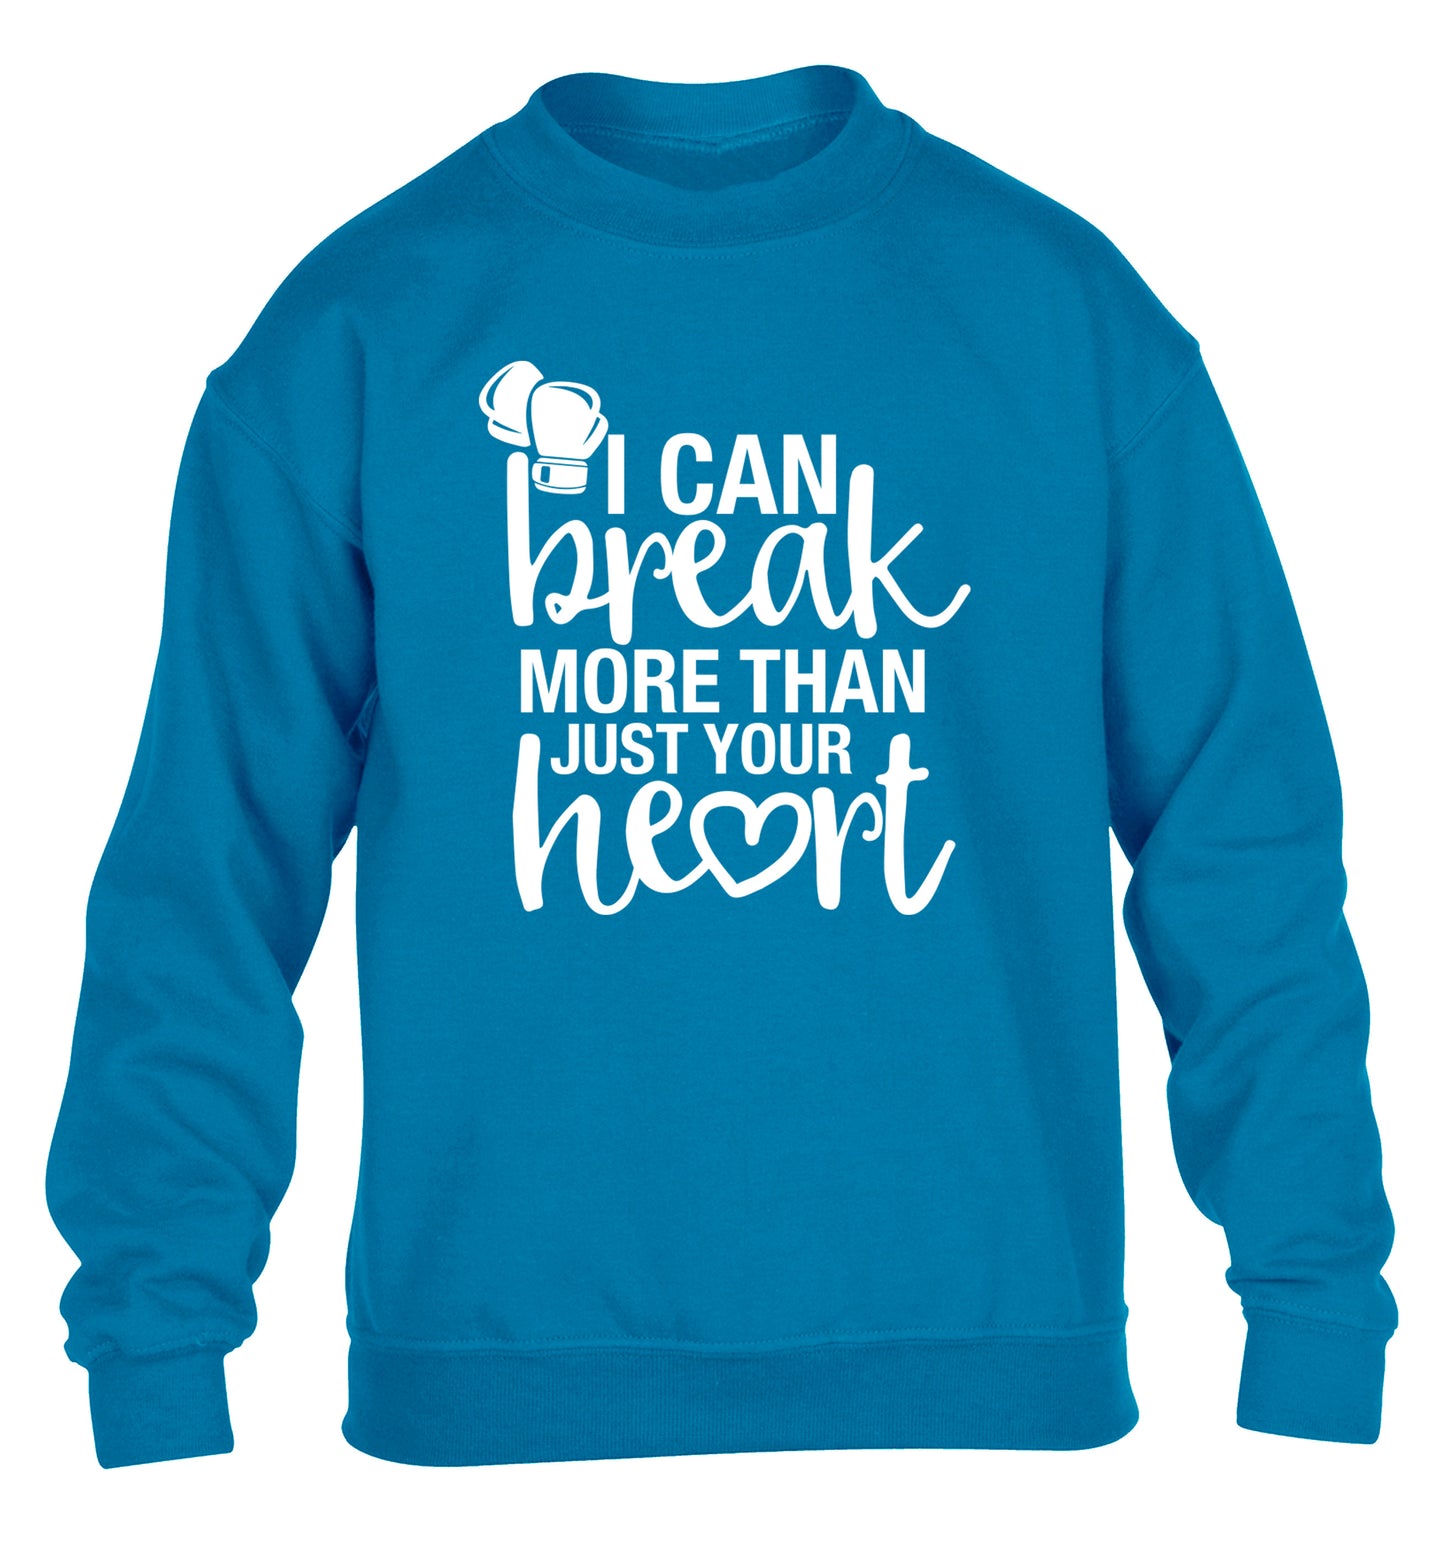 I can break more than just your heart children's blue sweater 12-13 Years